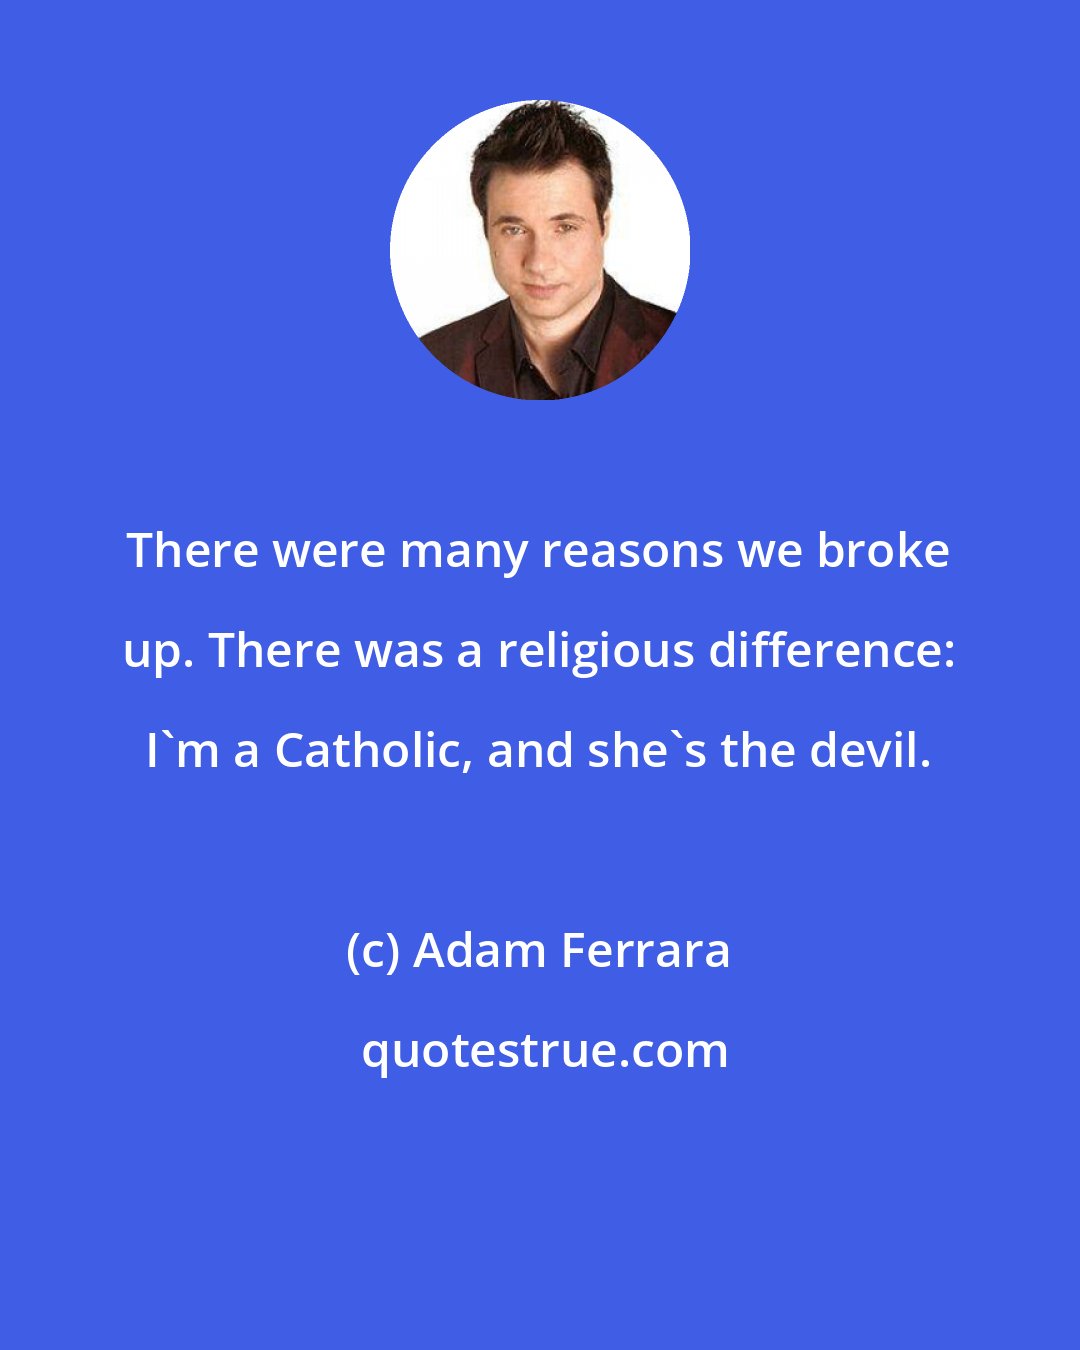 Adam Ferrara: There were many reasons we broke up. There was a religious difference: I'm a Catholic, and she's the devil.